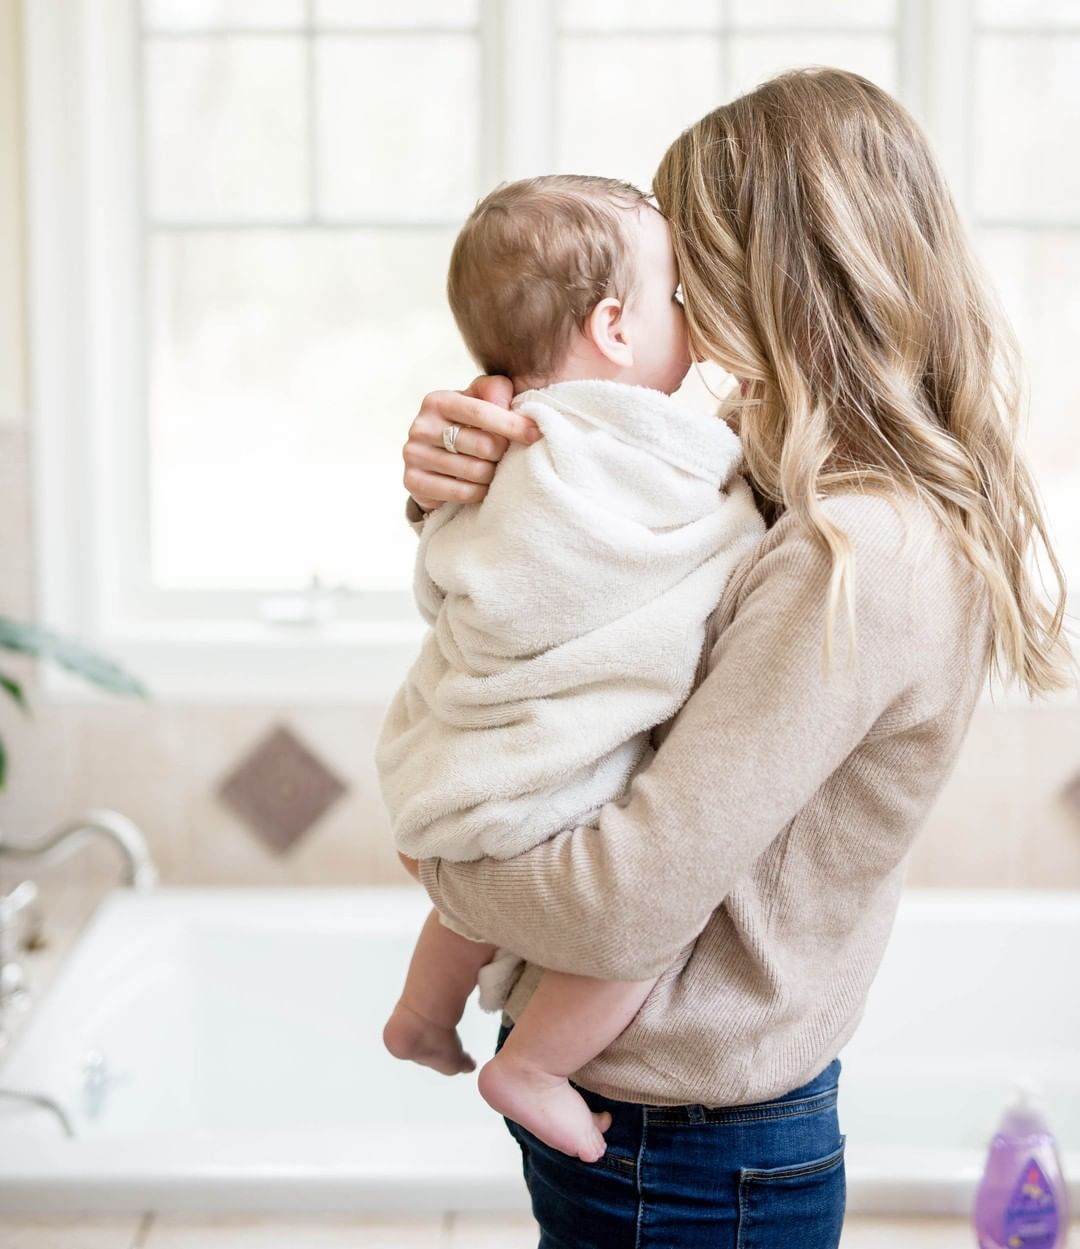 JOHNSON’S® - A warm hug after a warm bath is the perfect way to snuggle with your LO.

#baby #mom #dad #momlife #dadlife #momtribe #parenting #parenthood #parents #johnsons #johnsonsbaby #pregnancy #s...